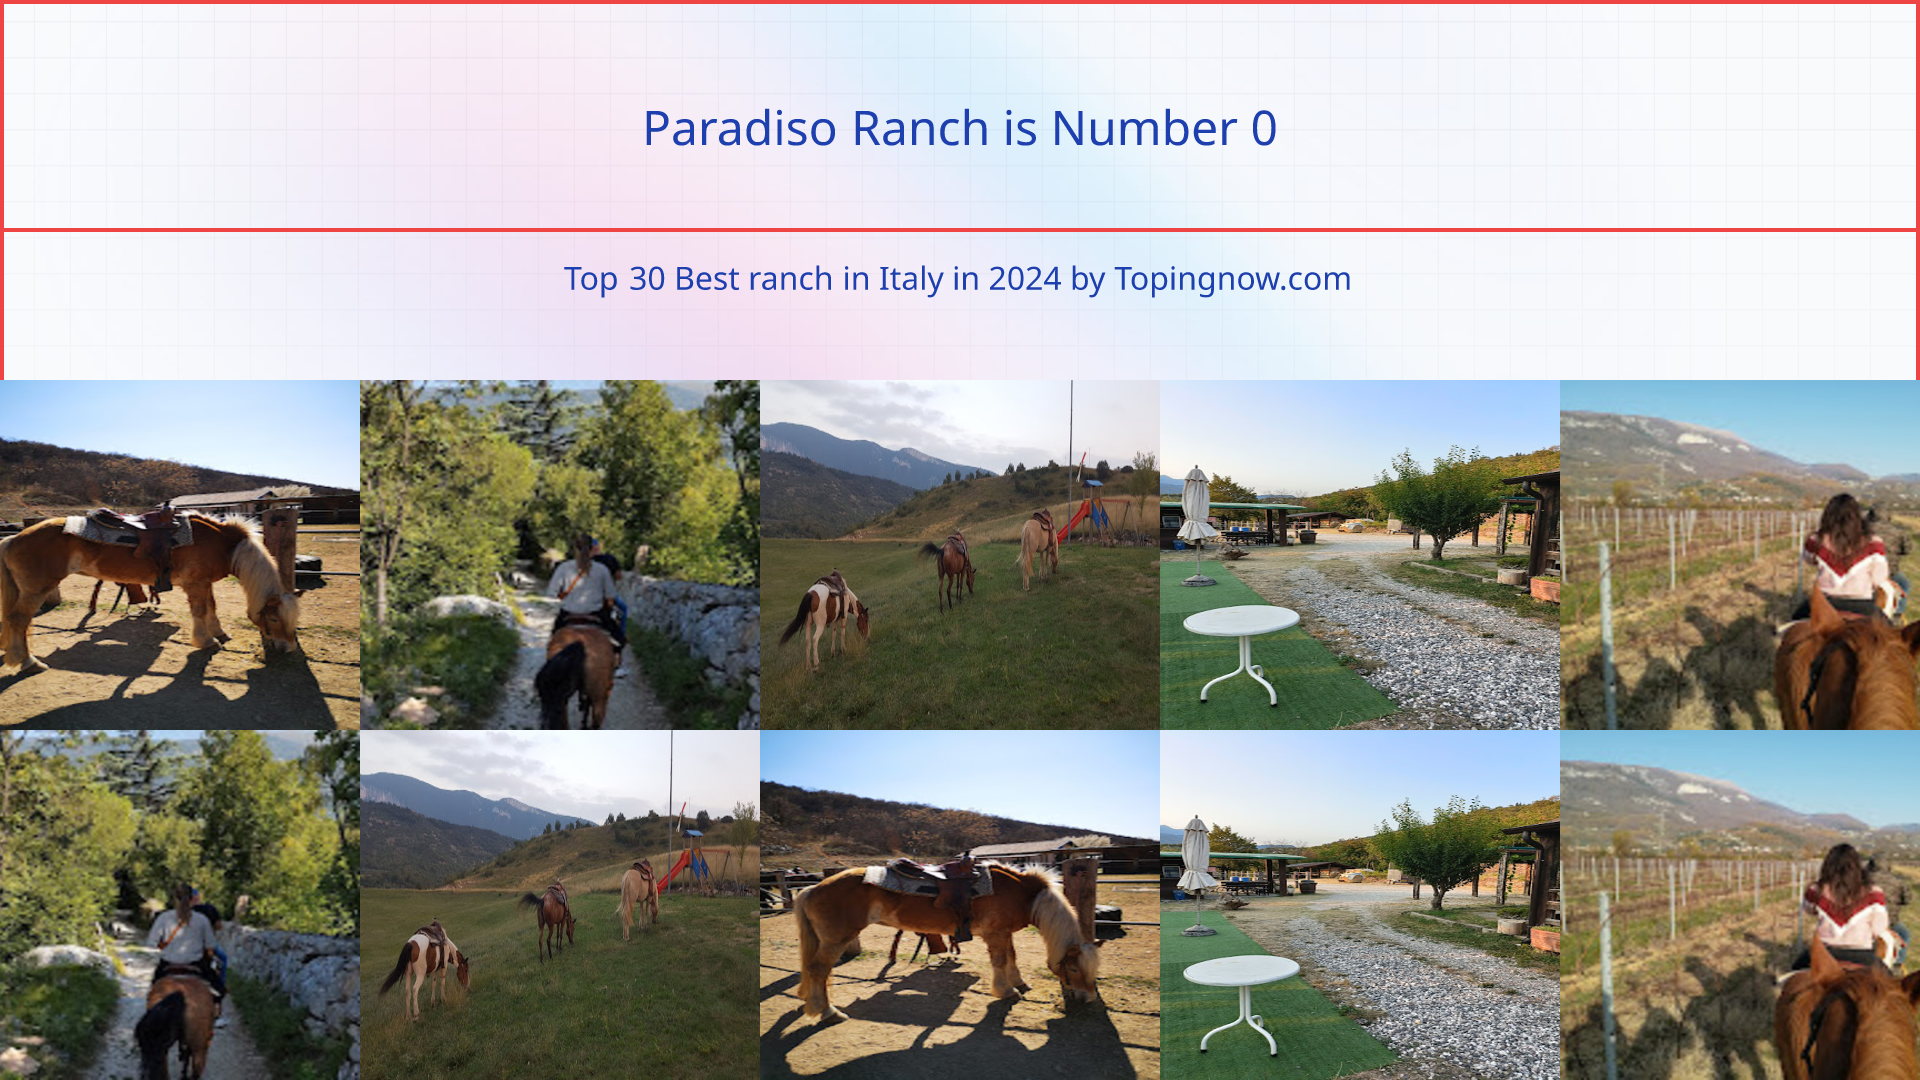 Paradiso Ranch: Top 30 Best ranch in Italy in 2024